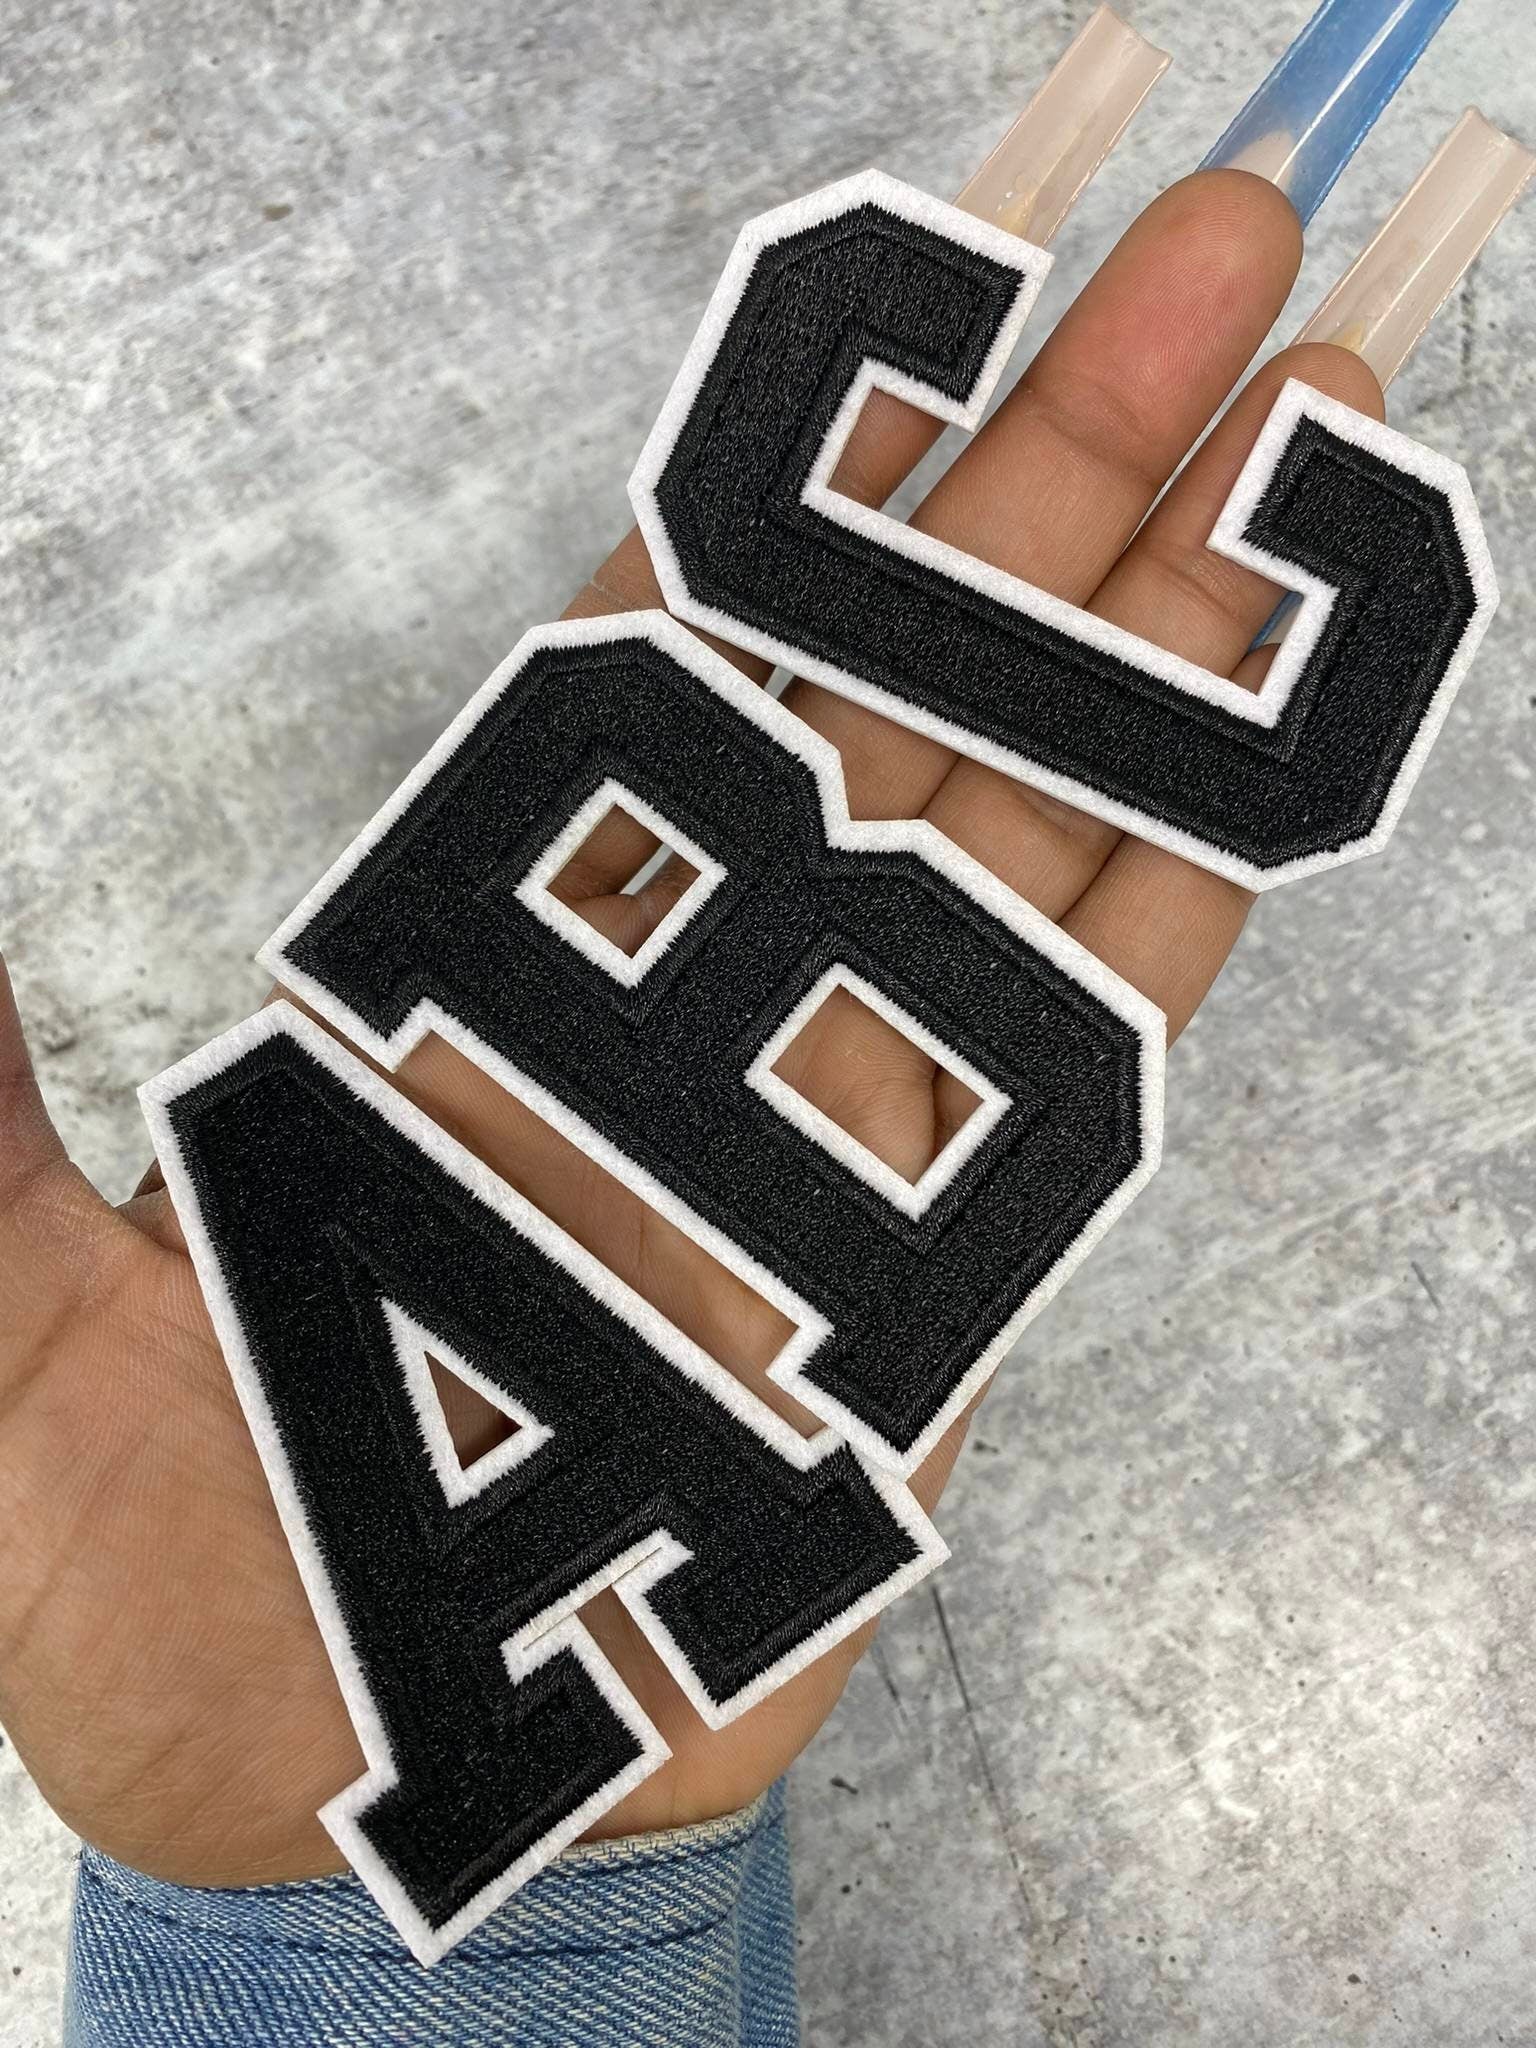 6Pcs Iron on Letters for Clothing Letter Patches Iron on Patches Varsity  Letter Patches Chenille Letter Patches Pink Iron on Letters for Backpacks